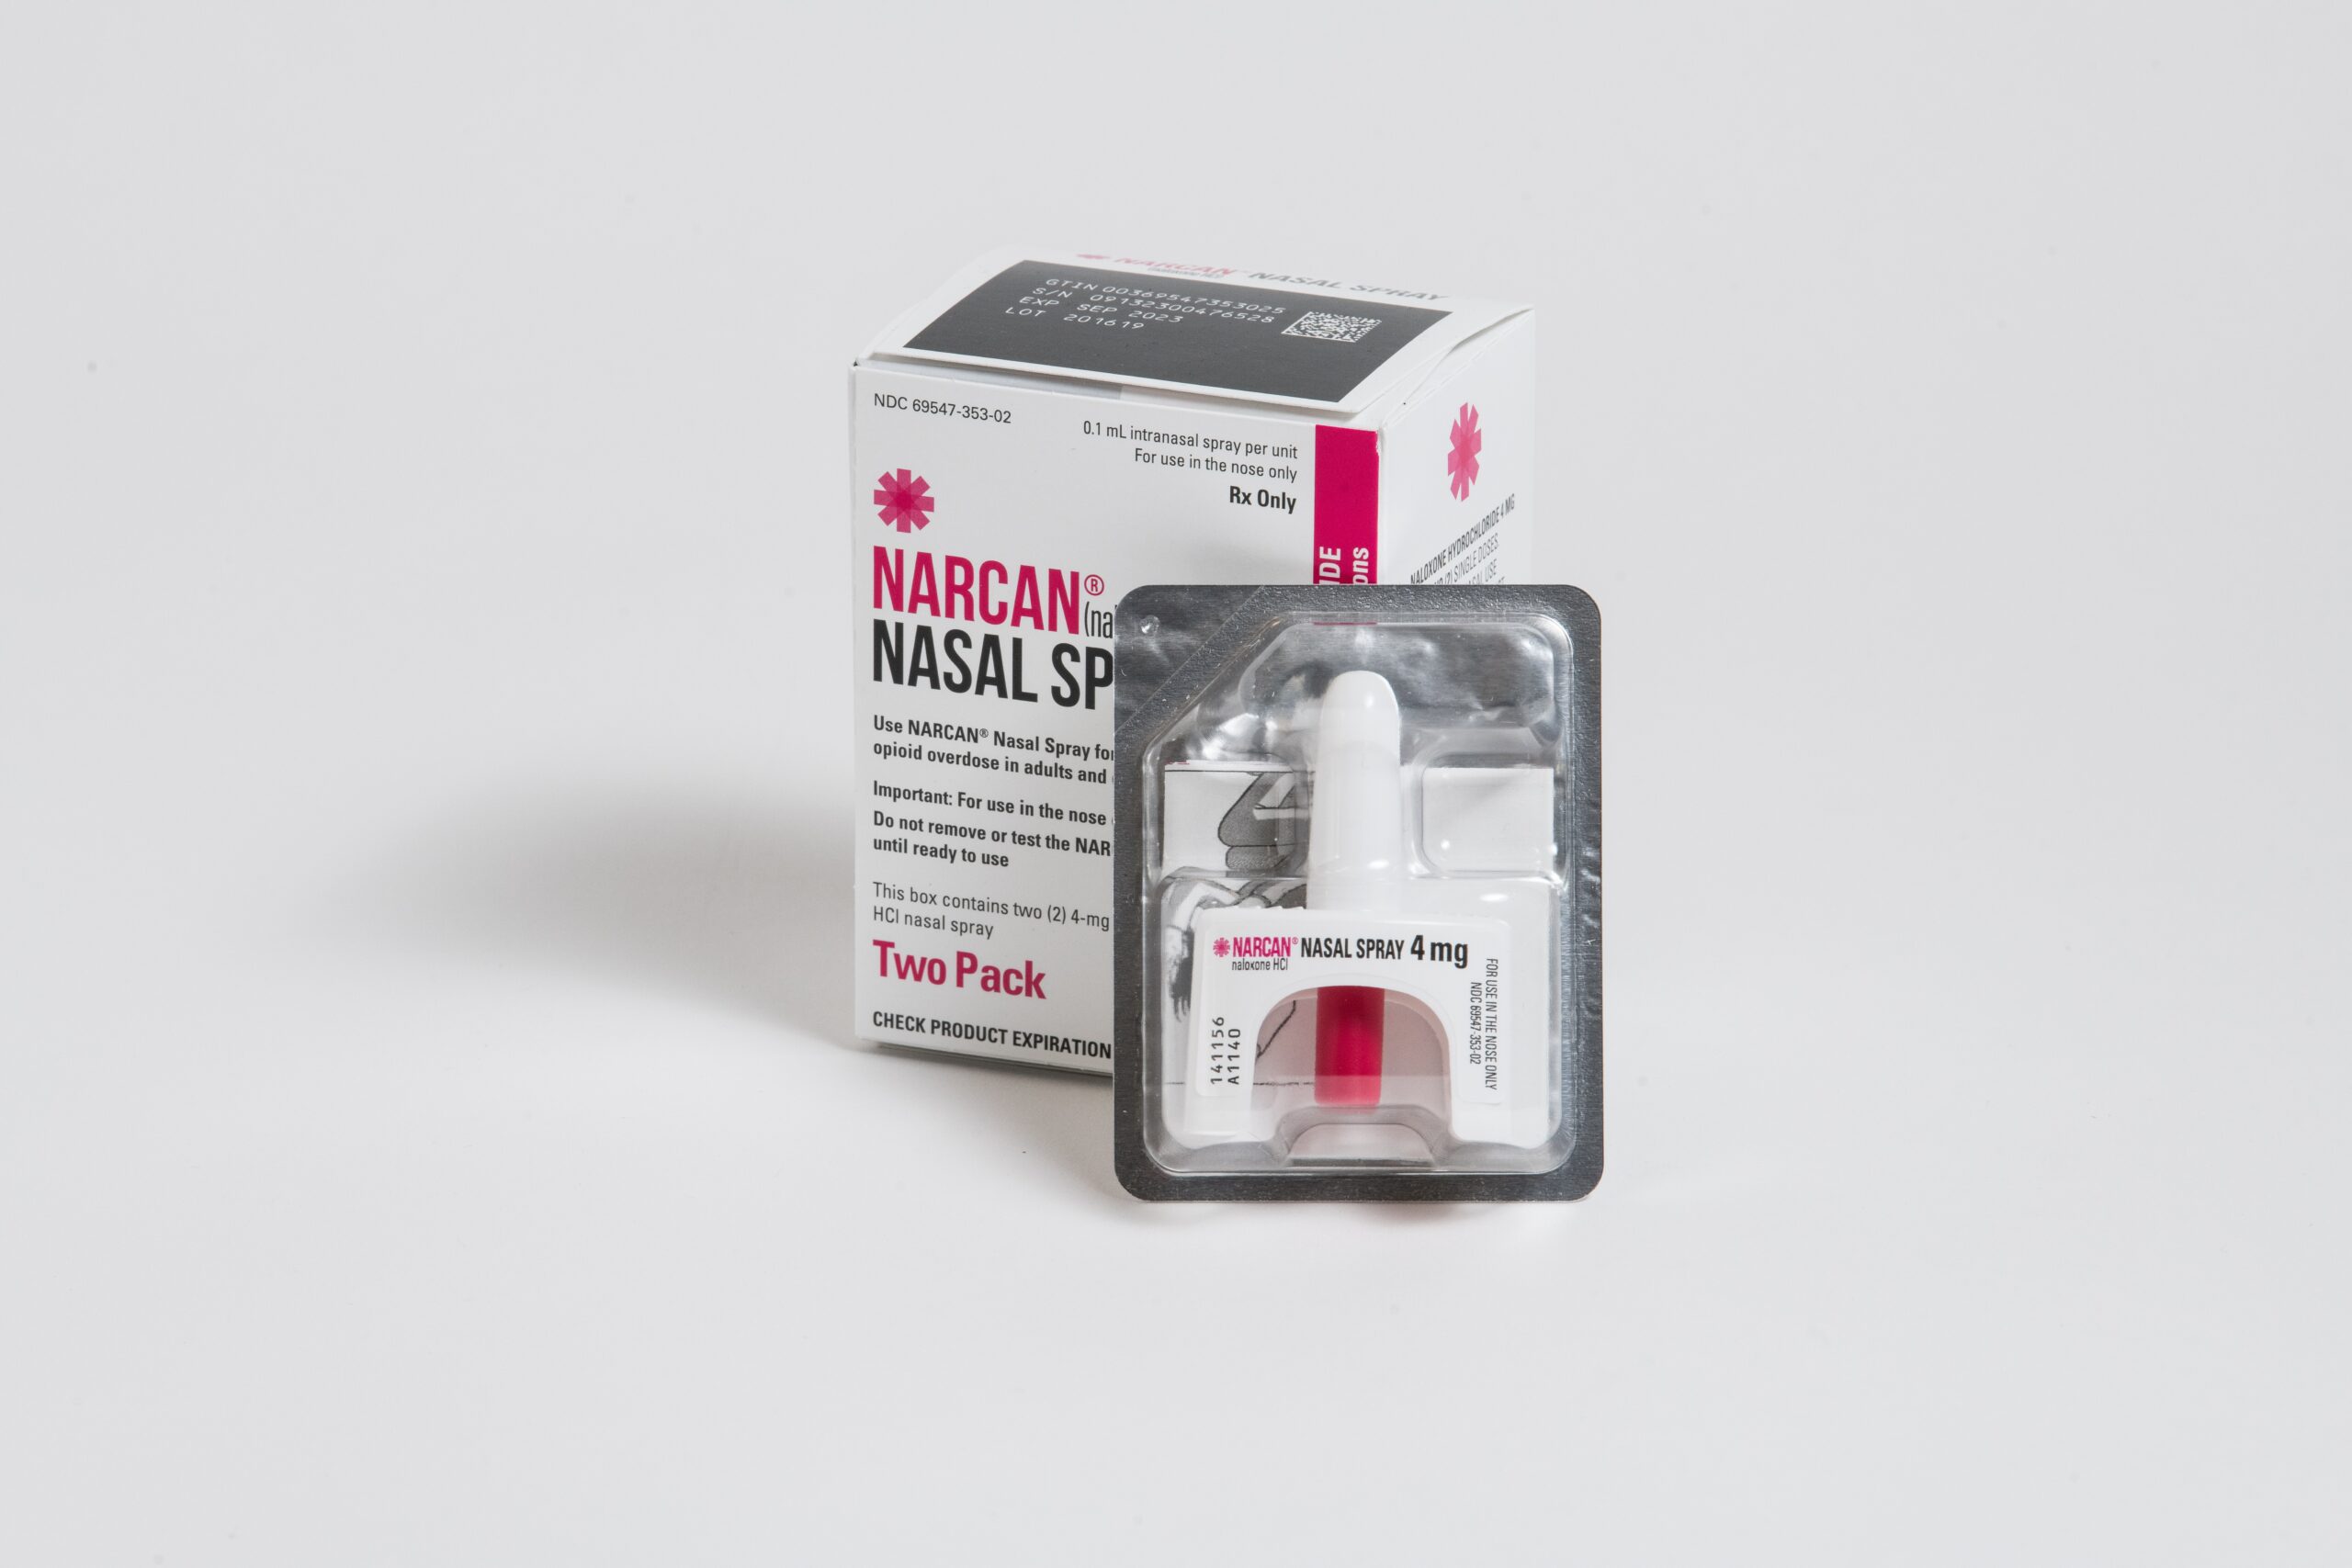 A photo of a Narcan nasal spray kit sitting on a white backdrop.